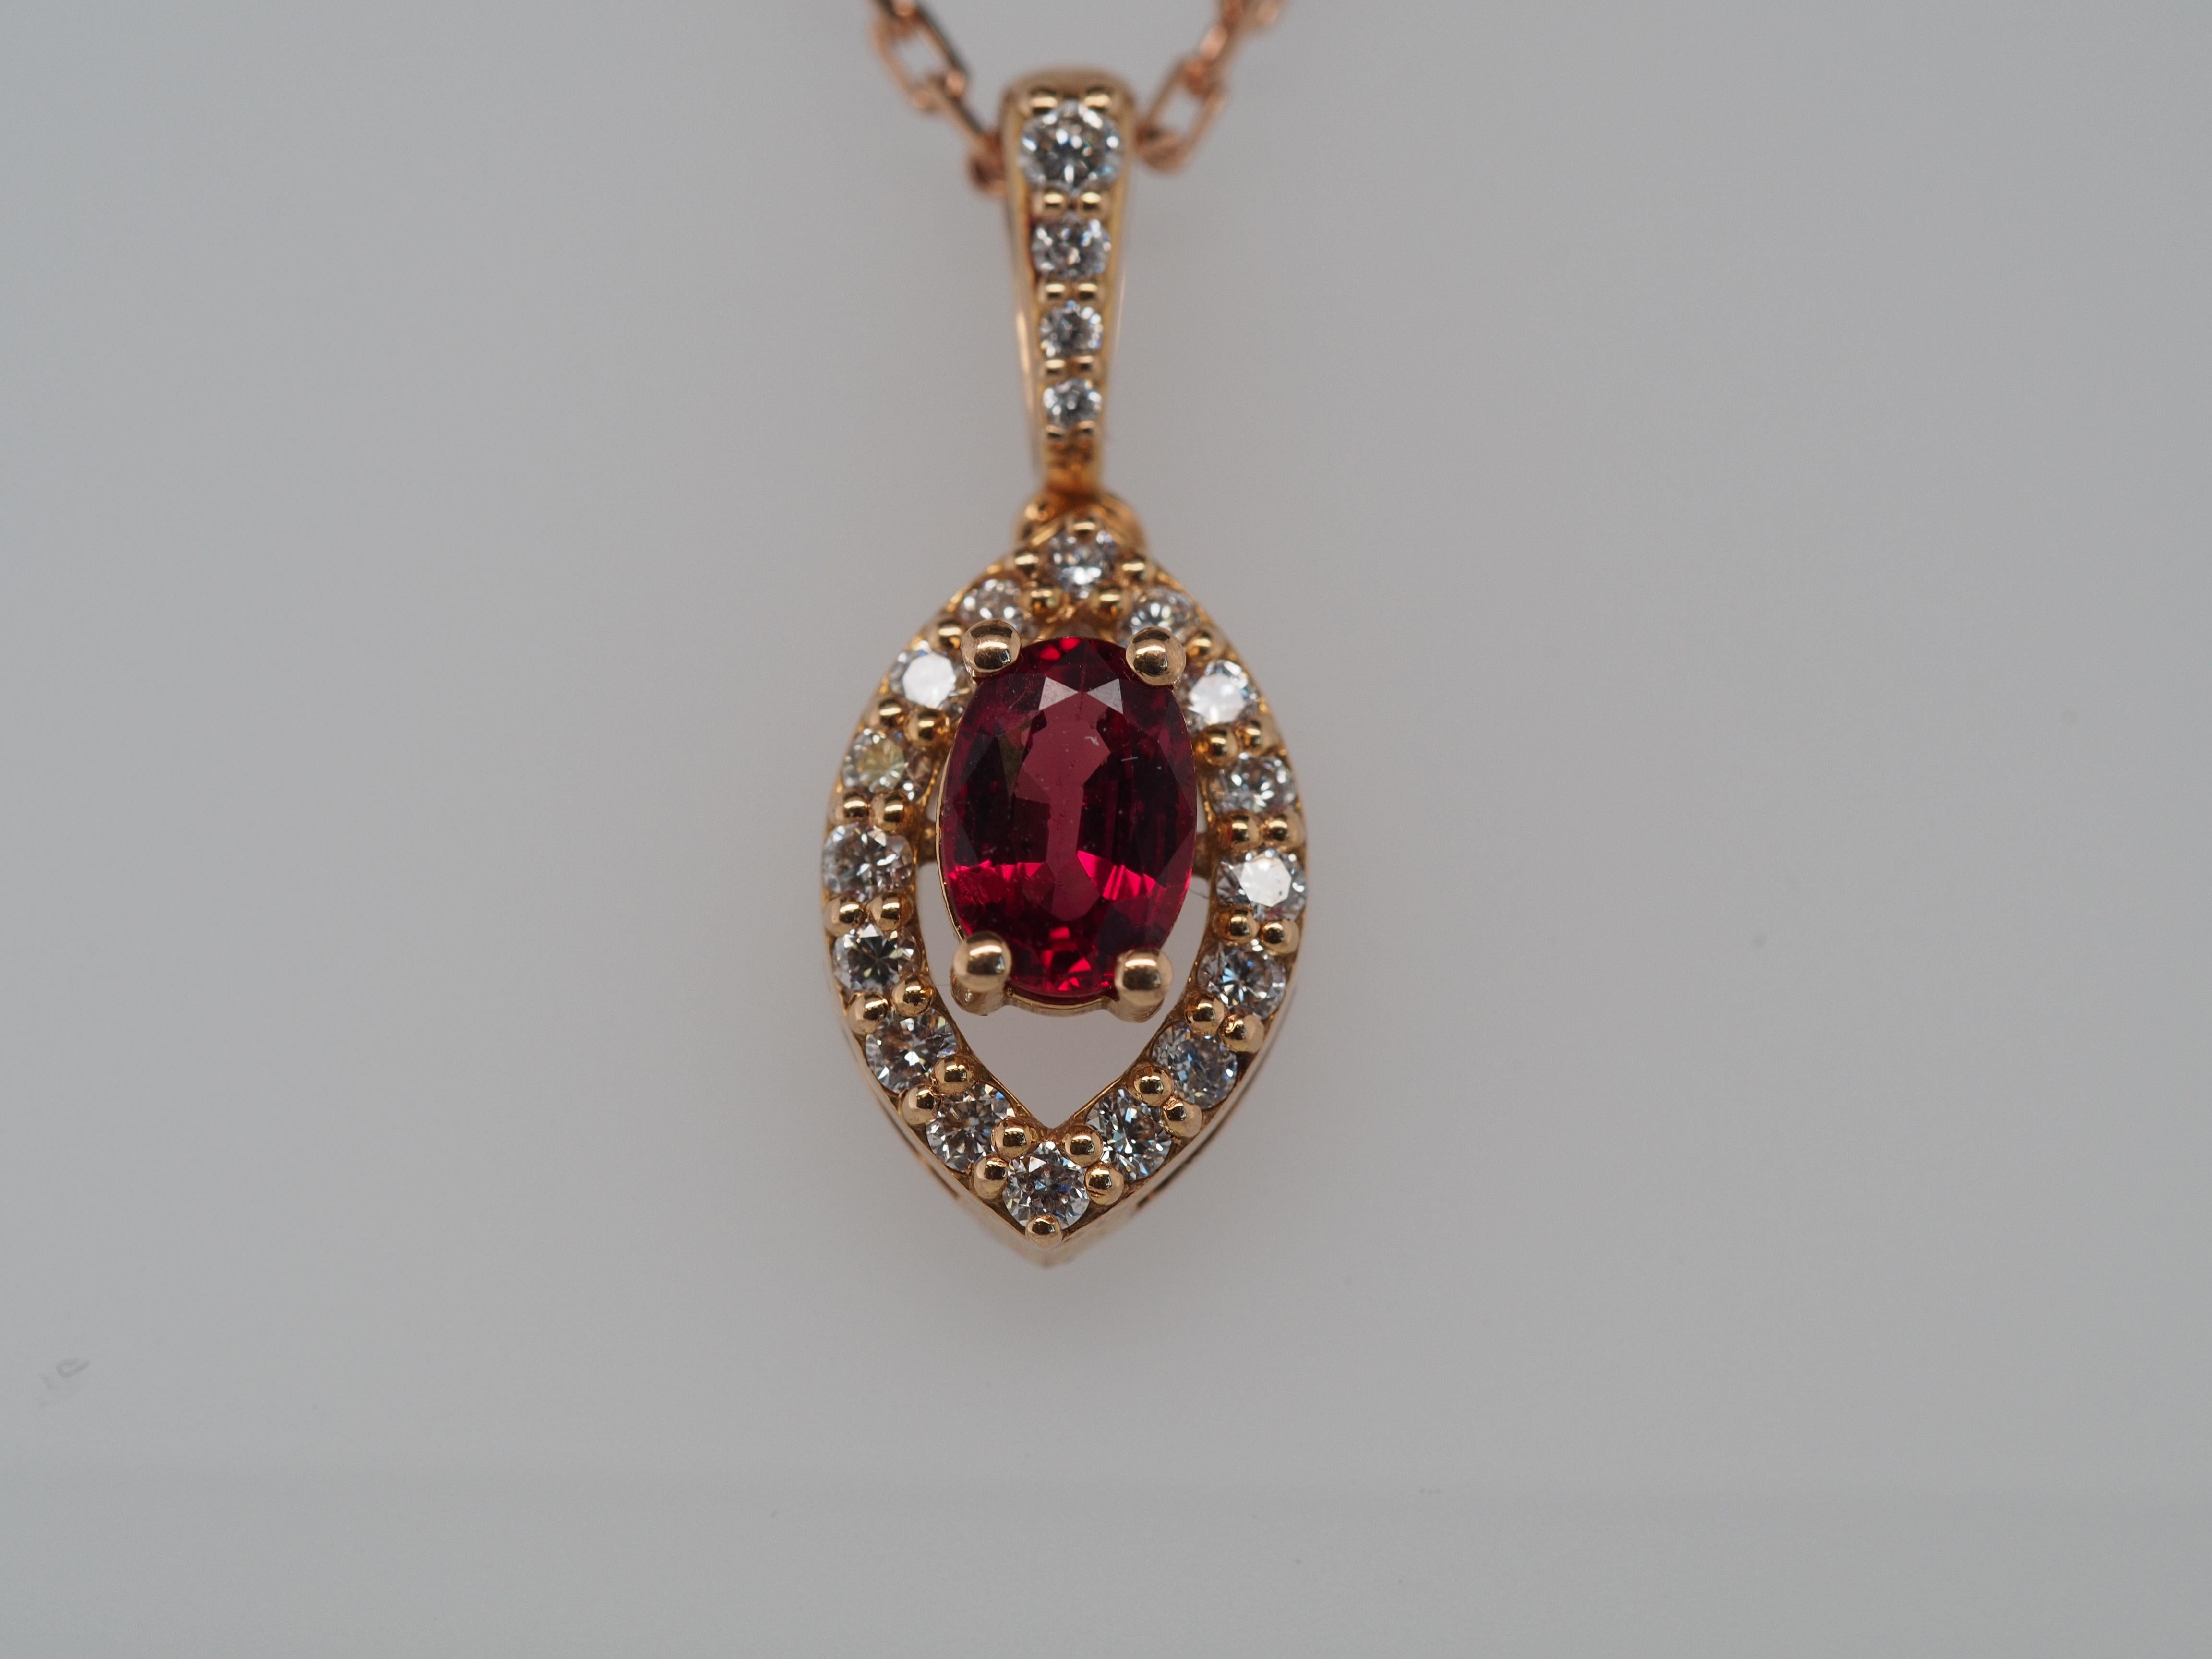 Item Details:
Metal Type: 18K Yellow Gold [Hallmarked, and Tested]
Weight: 4.5 grams
Ruby Details: Natural, .50ct, Deep Red, Oval Shape
Diamond Details: .25ct,total weight. G-H VS Clarity.
Length: 17 Inches
Condition: Excellent
Price: $1200